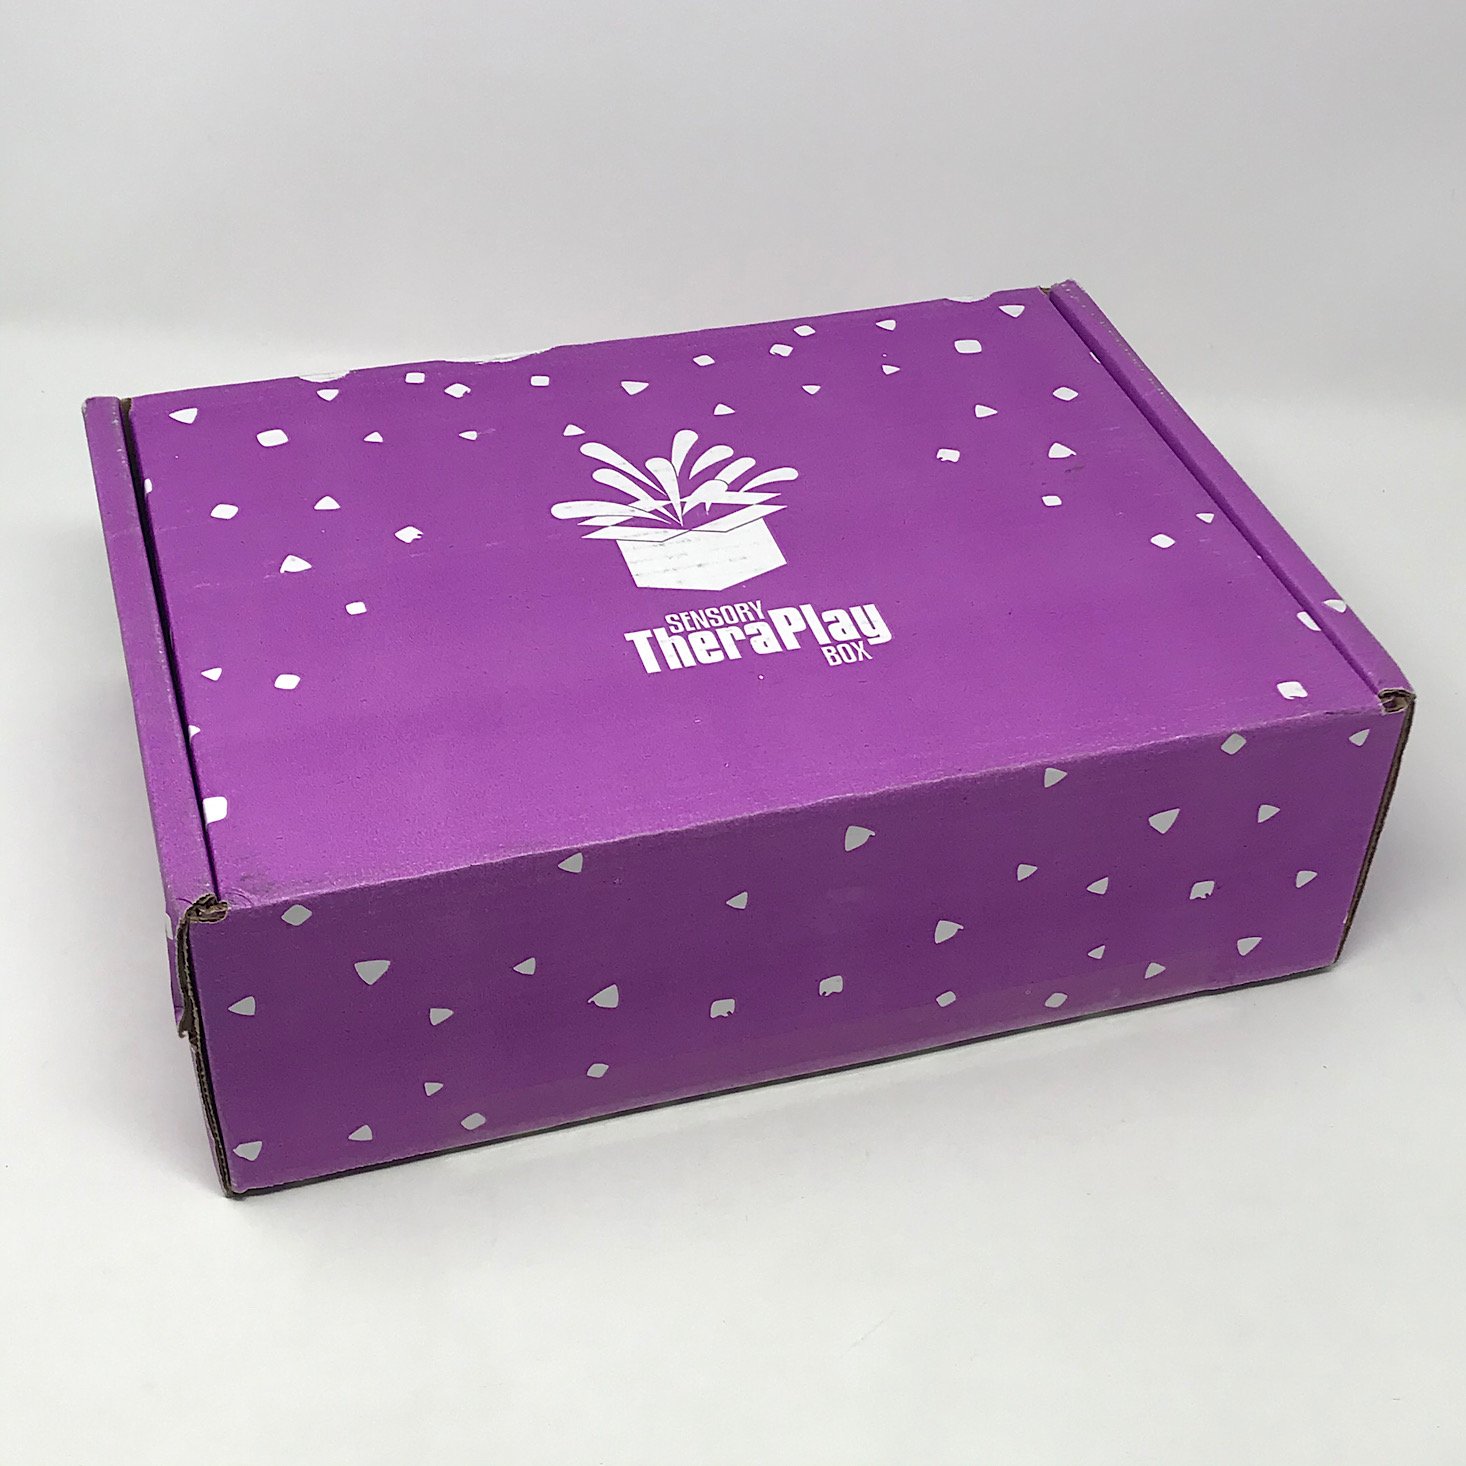 Sensory TheraPlay Box Review + Coupon – March 2020